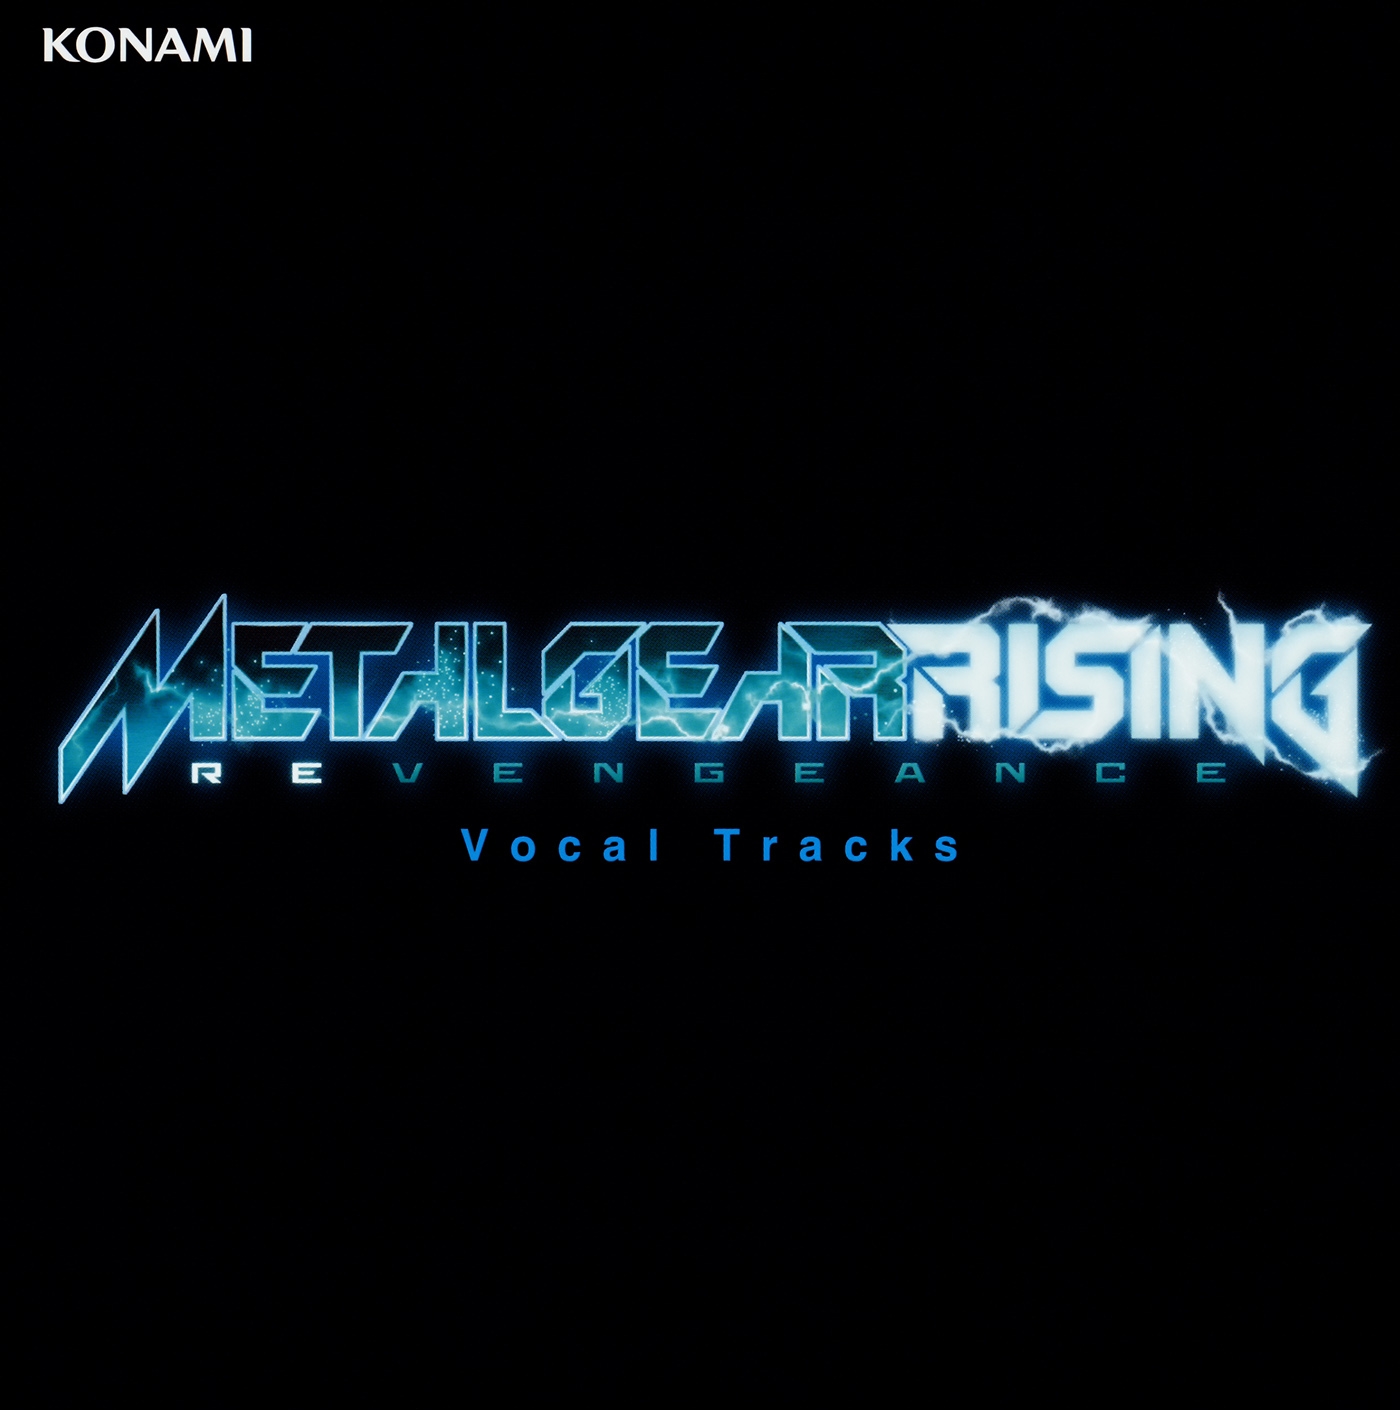 Metal gear rising The only thing i know for real – Jamie Christopherson  Sheet music for Piano (Solo)